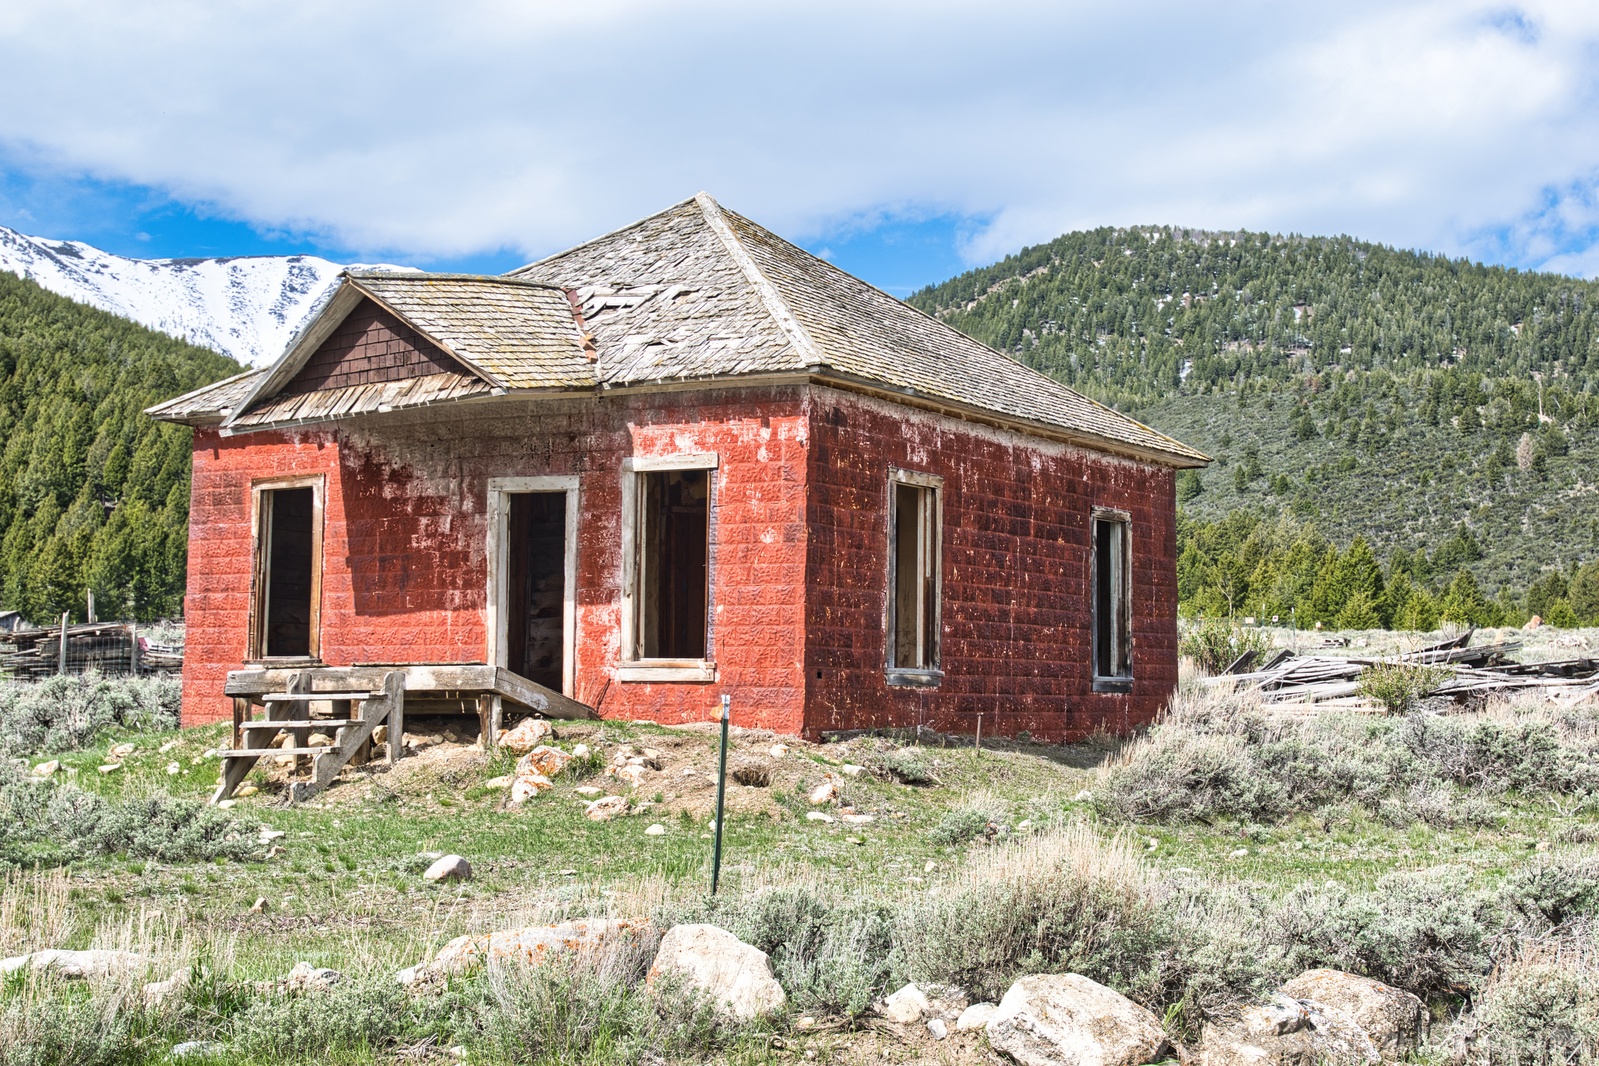 Image of Gilmore, Idaho Ghost Town by Steve West